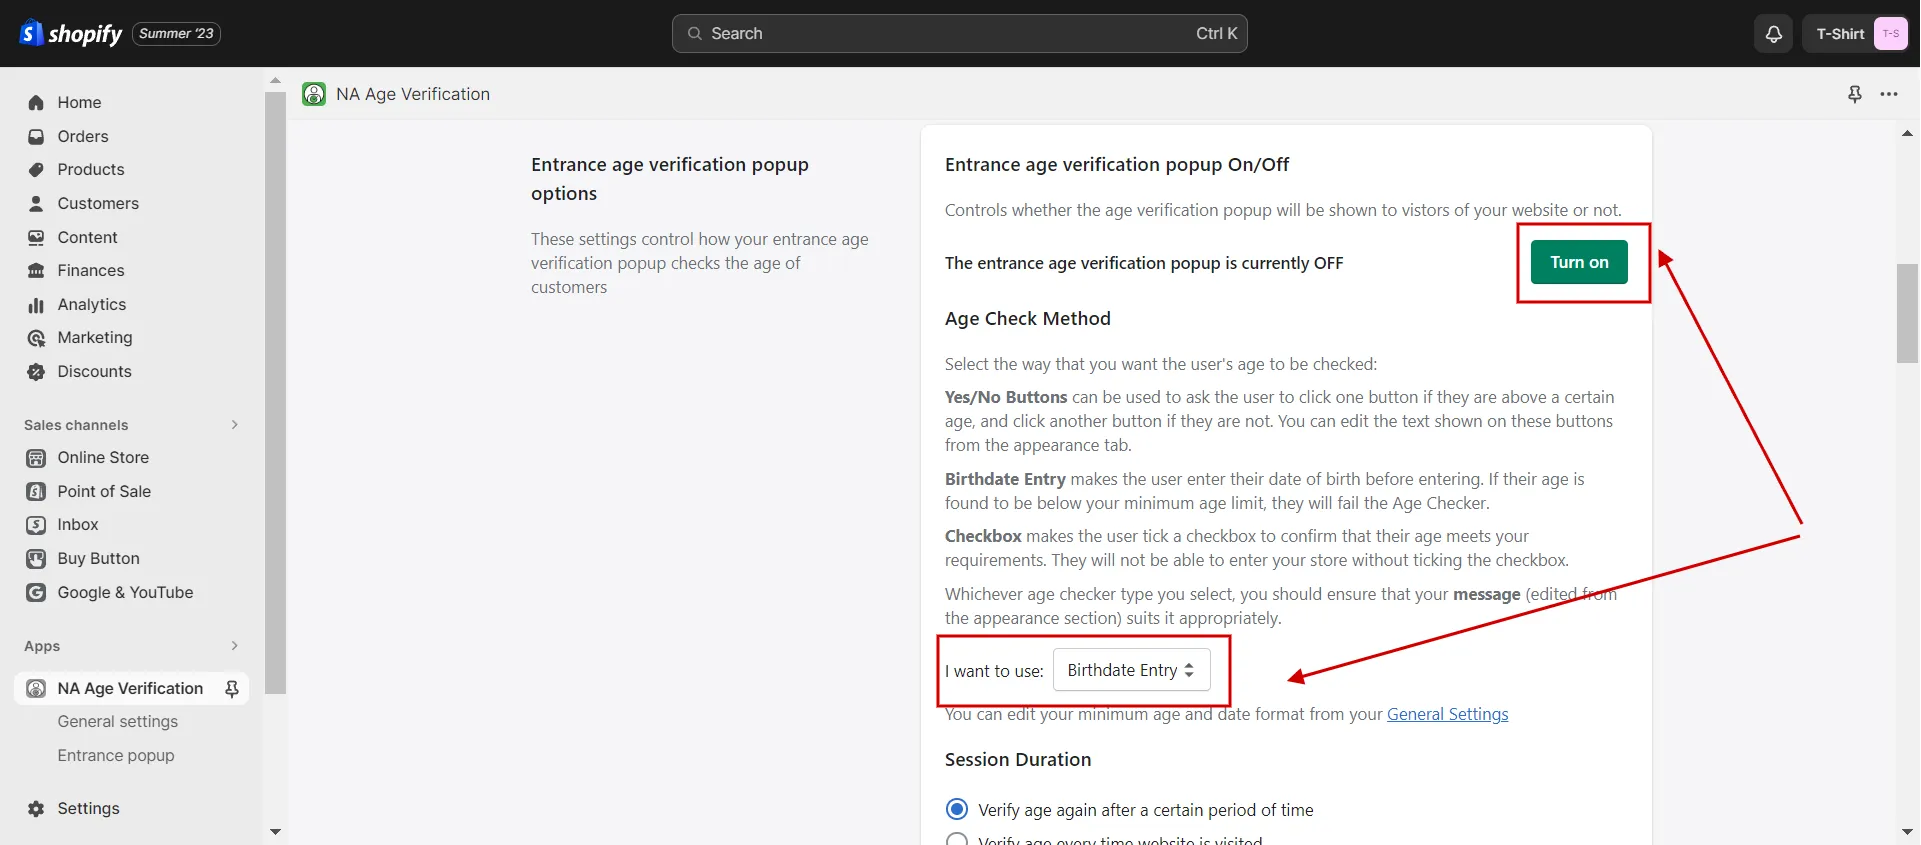 How to add age verification popup on Shopify by apps